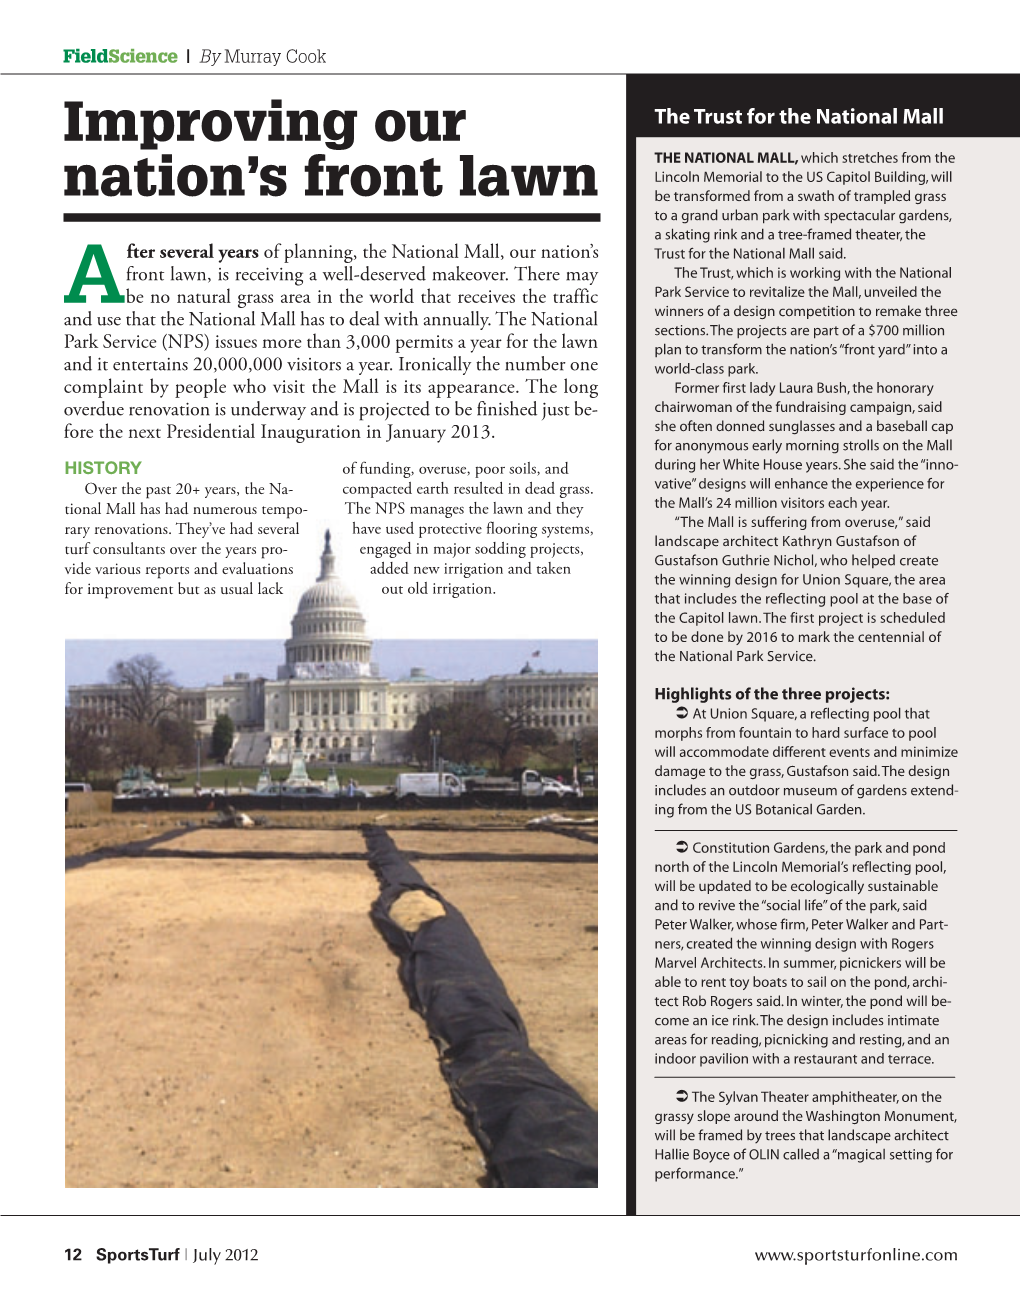 Improving Our Nation's Front Lawn